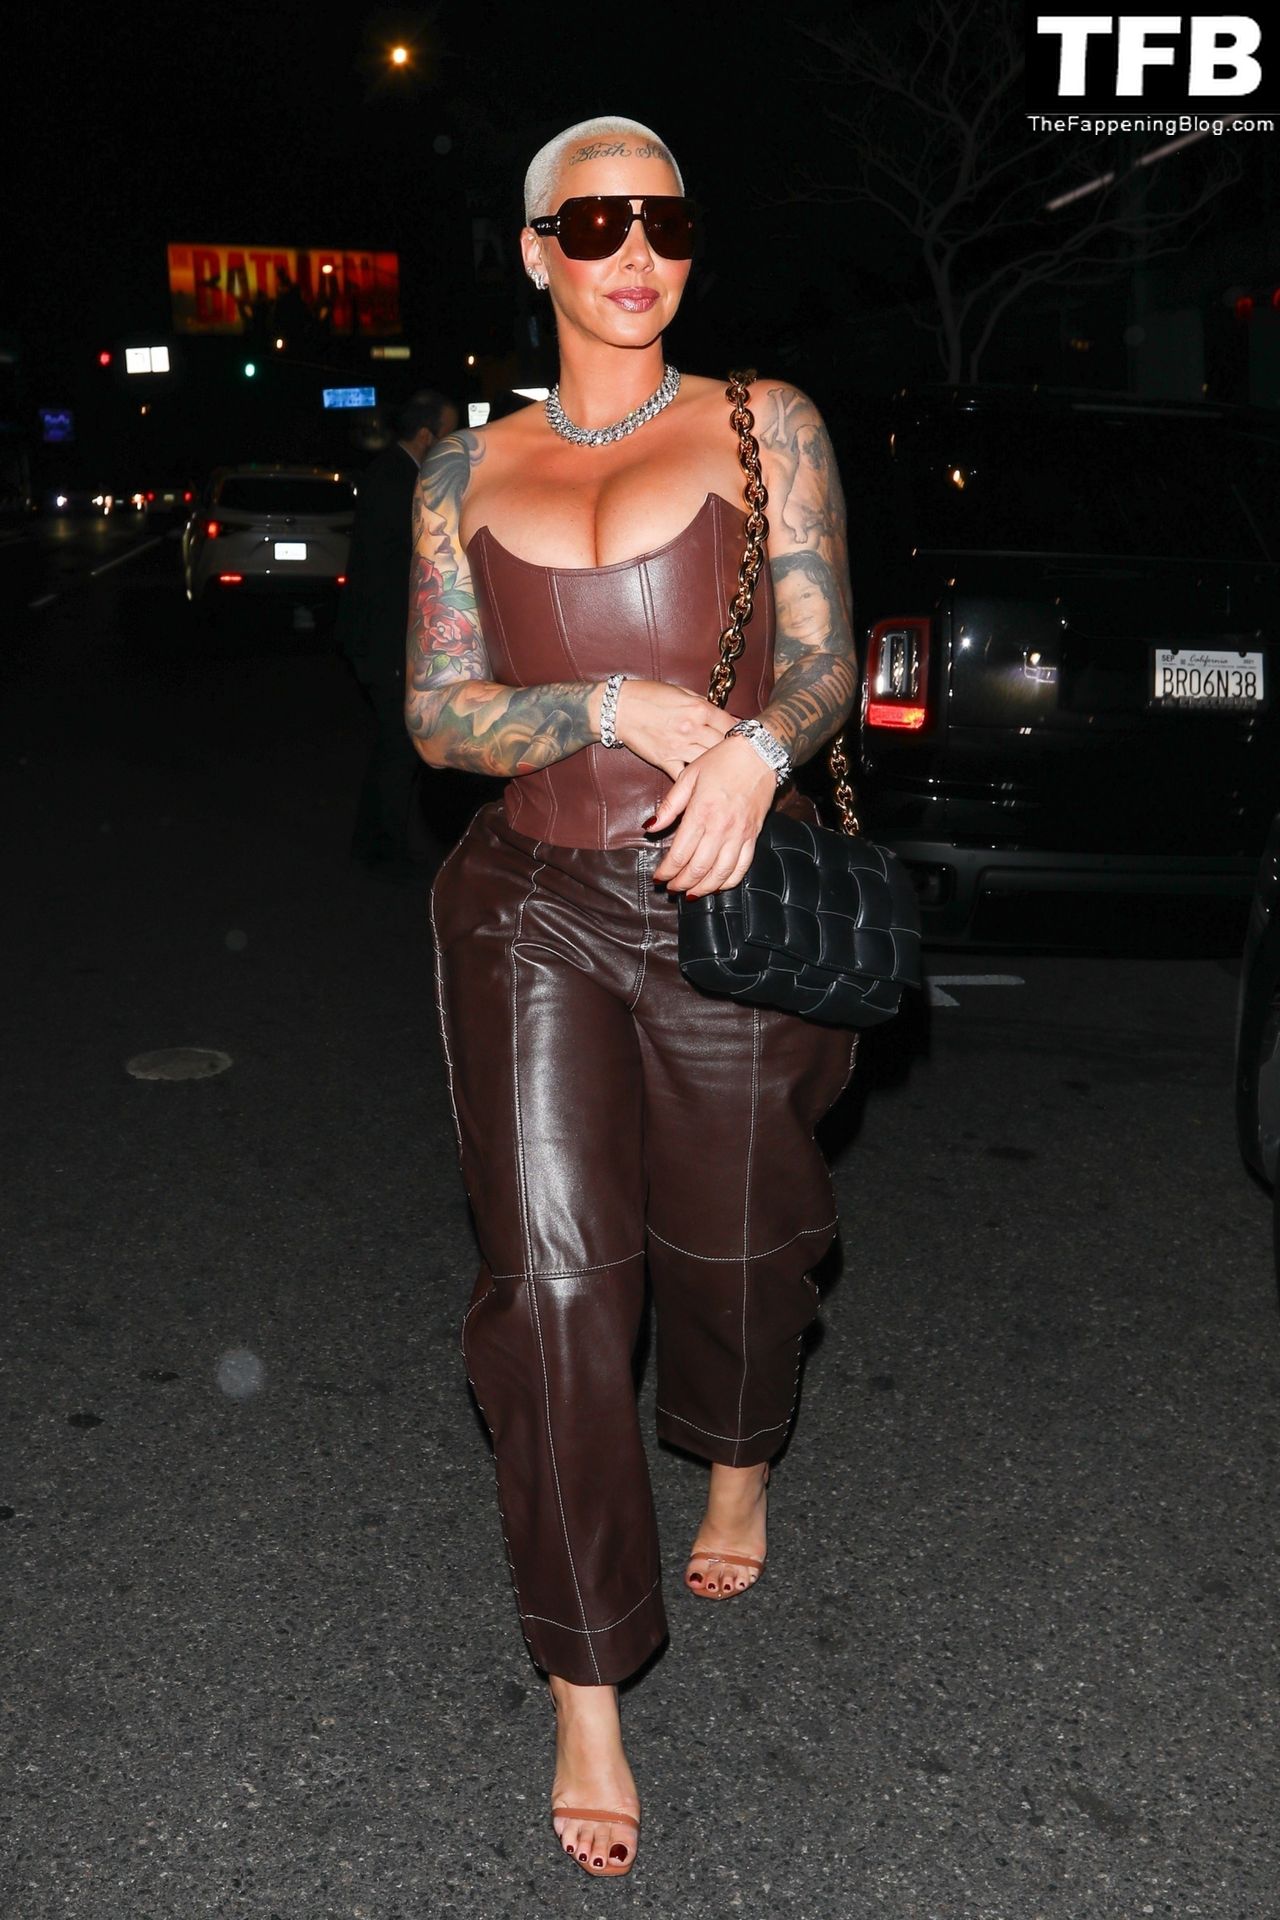 Amber-Rose-Sexy-The-Fappening-Blog-10.jpg